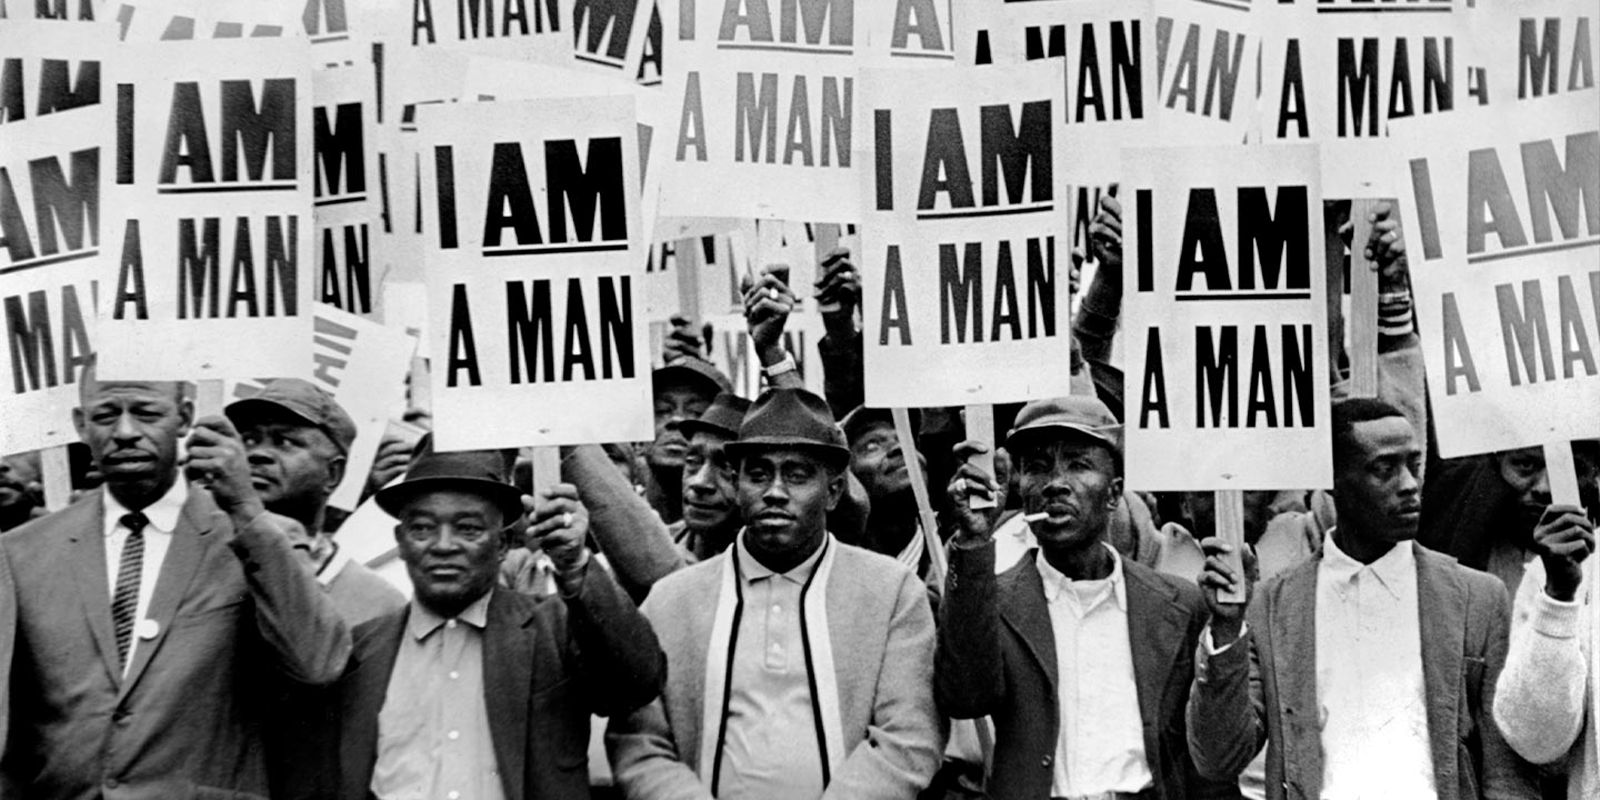 AFSCME’s ‘I AM Story’ podcast nominated for NAACP Image Award